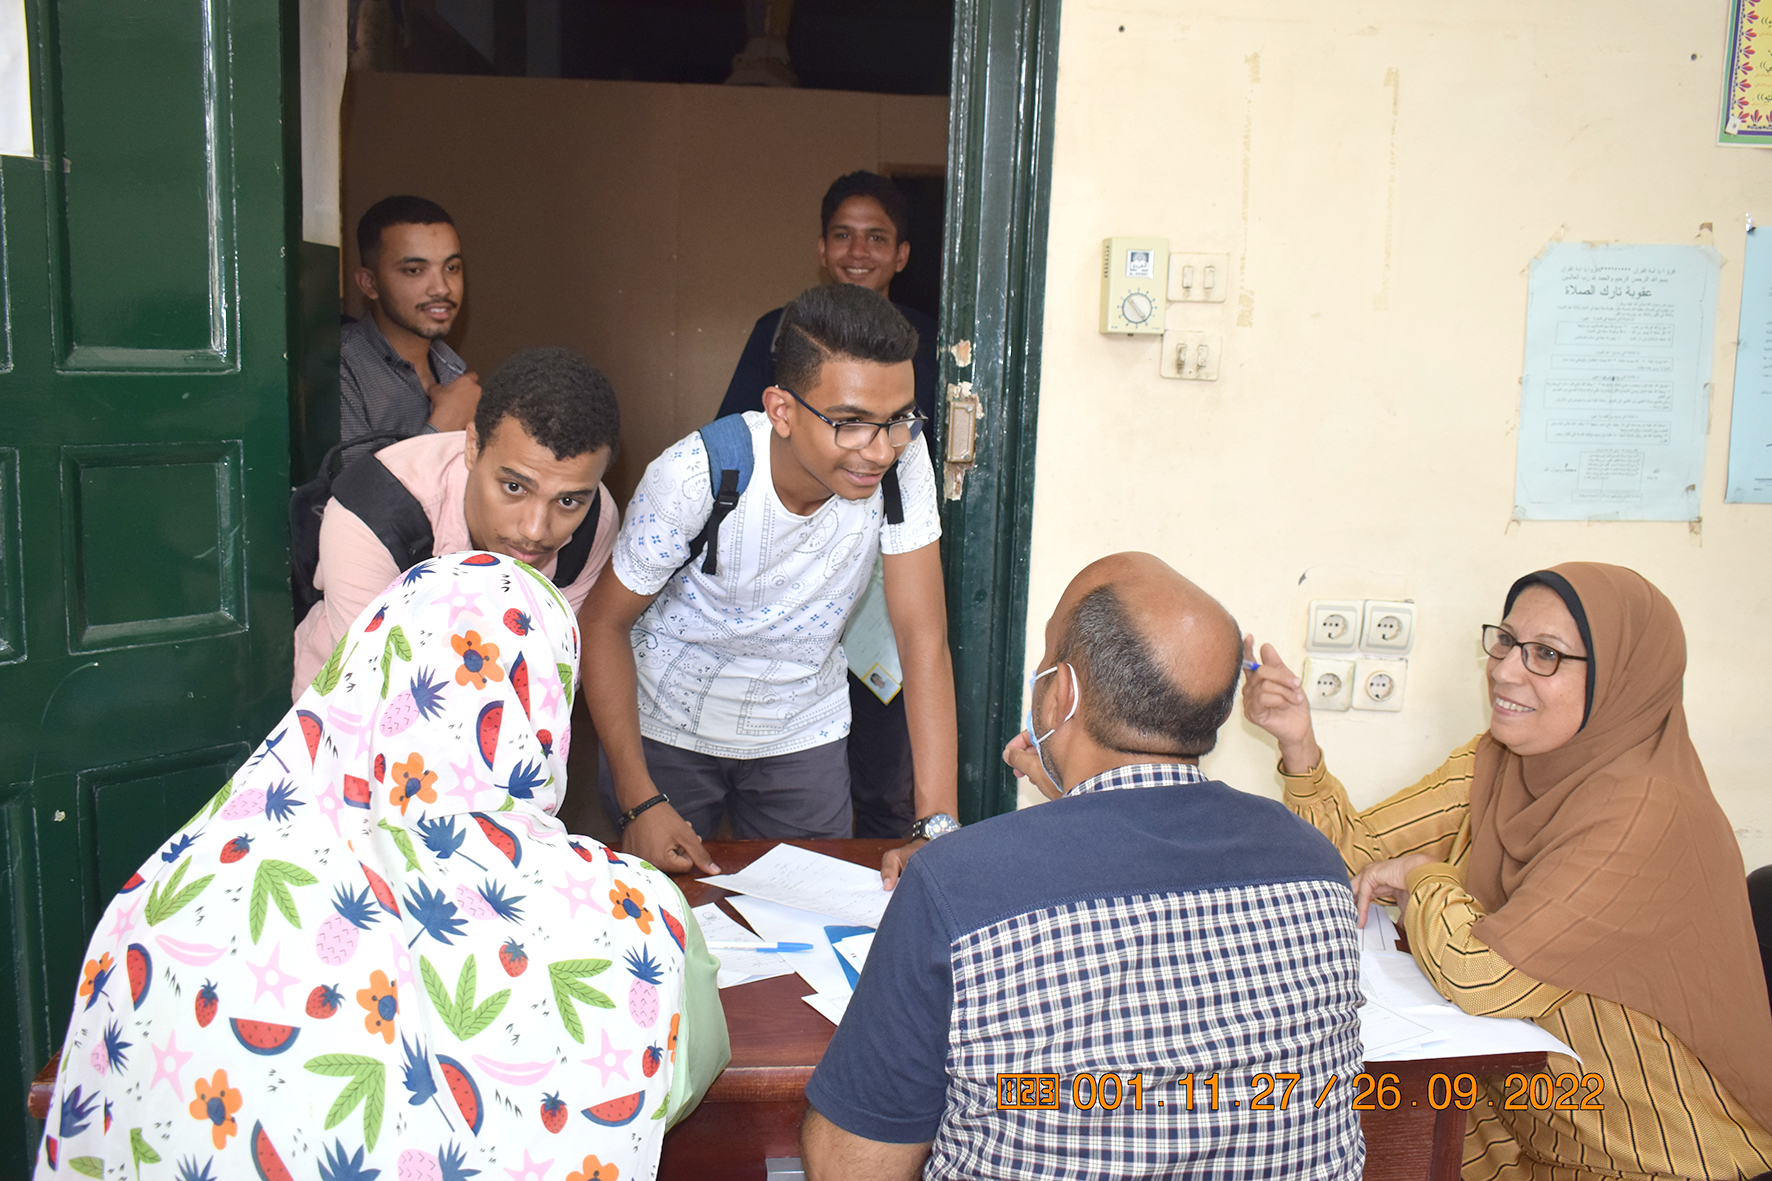 Receiving new students for medical examination